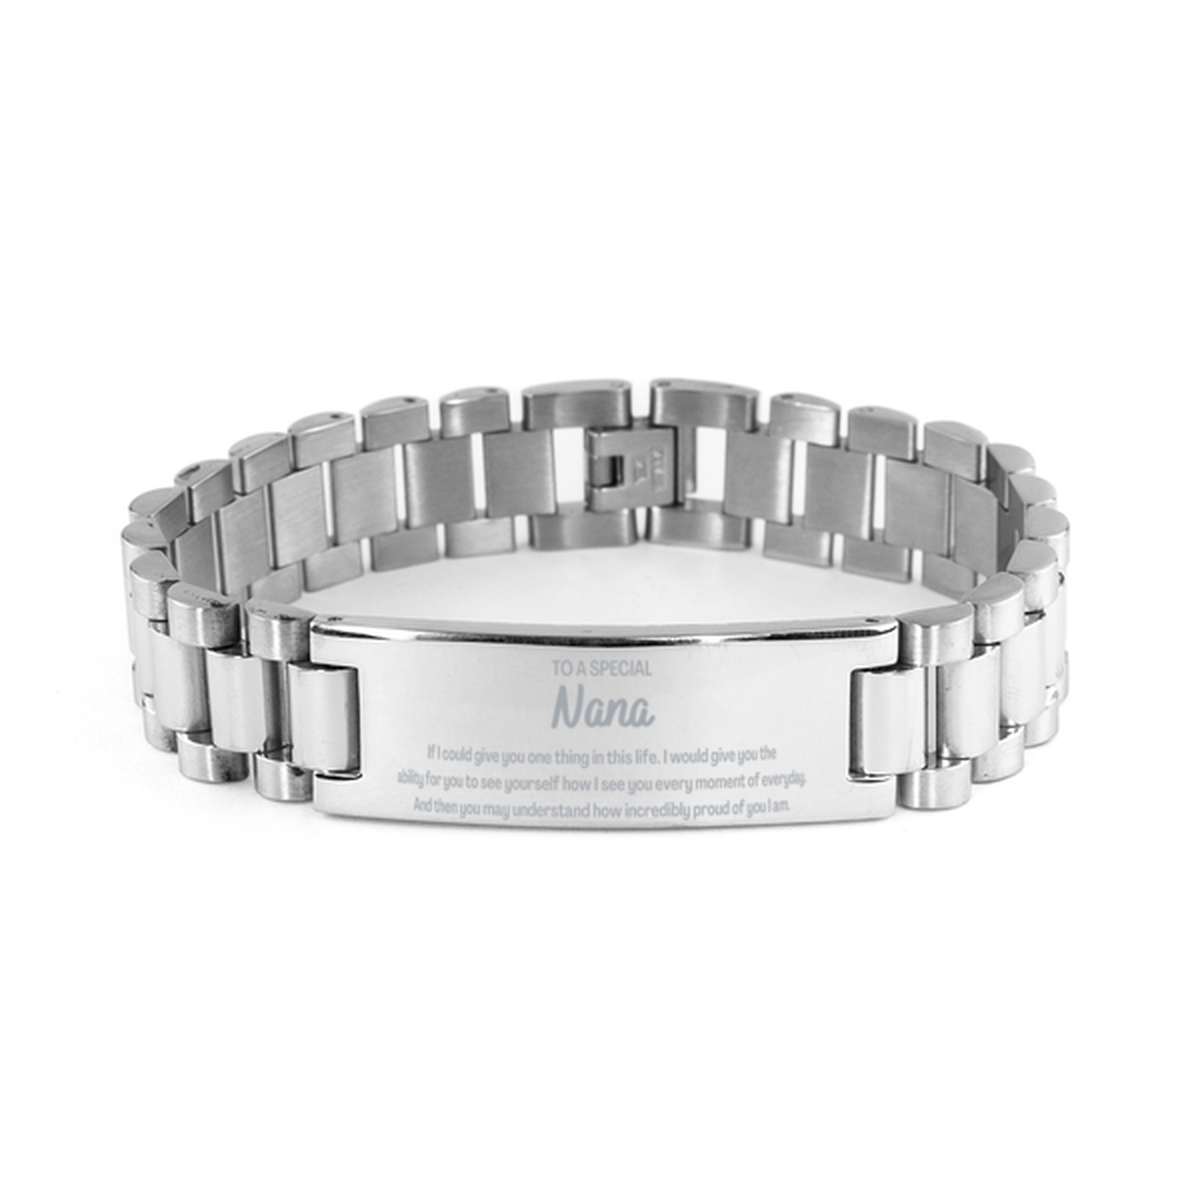 To My Nana Ladder Stainless Steel Bracelet, Gifts For Nana Engraved, Inspirational Gifts for Christmas Birthday, Epic Gifts for Nana To A Special Nana how incredibly proud of you I am